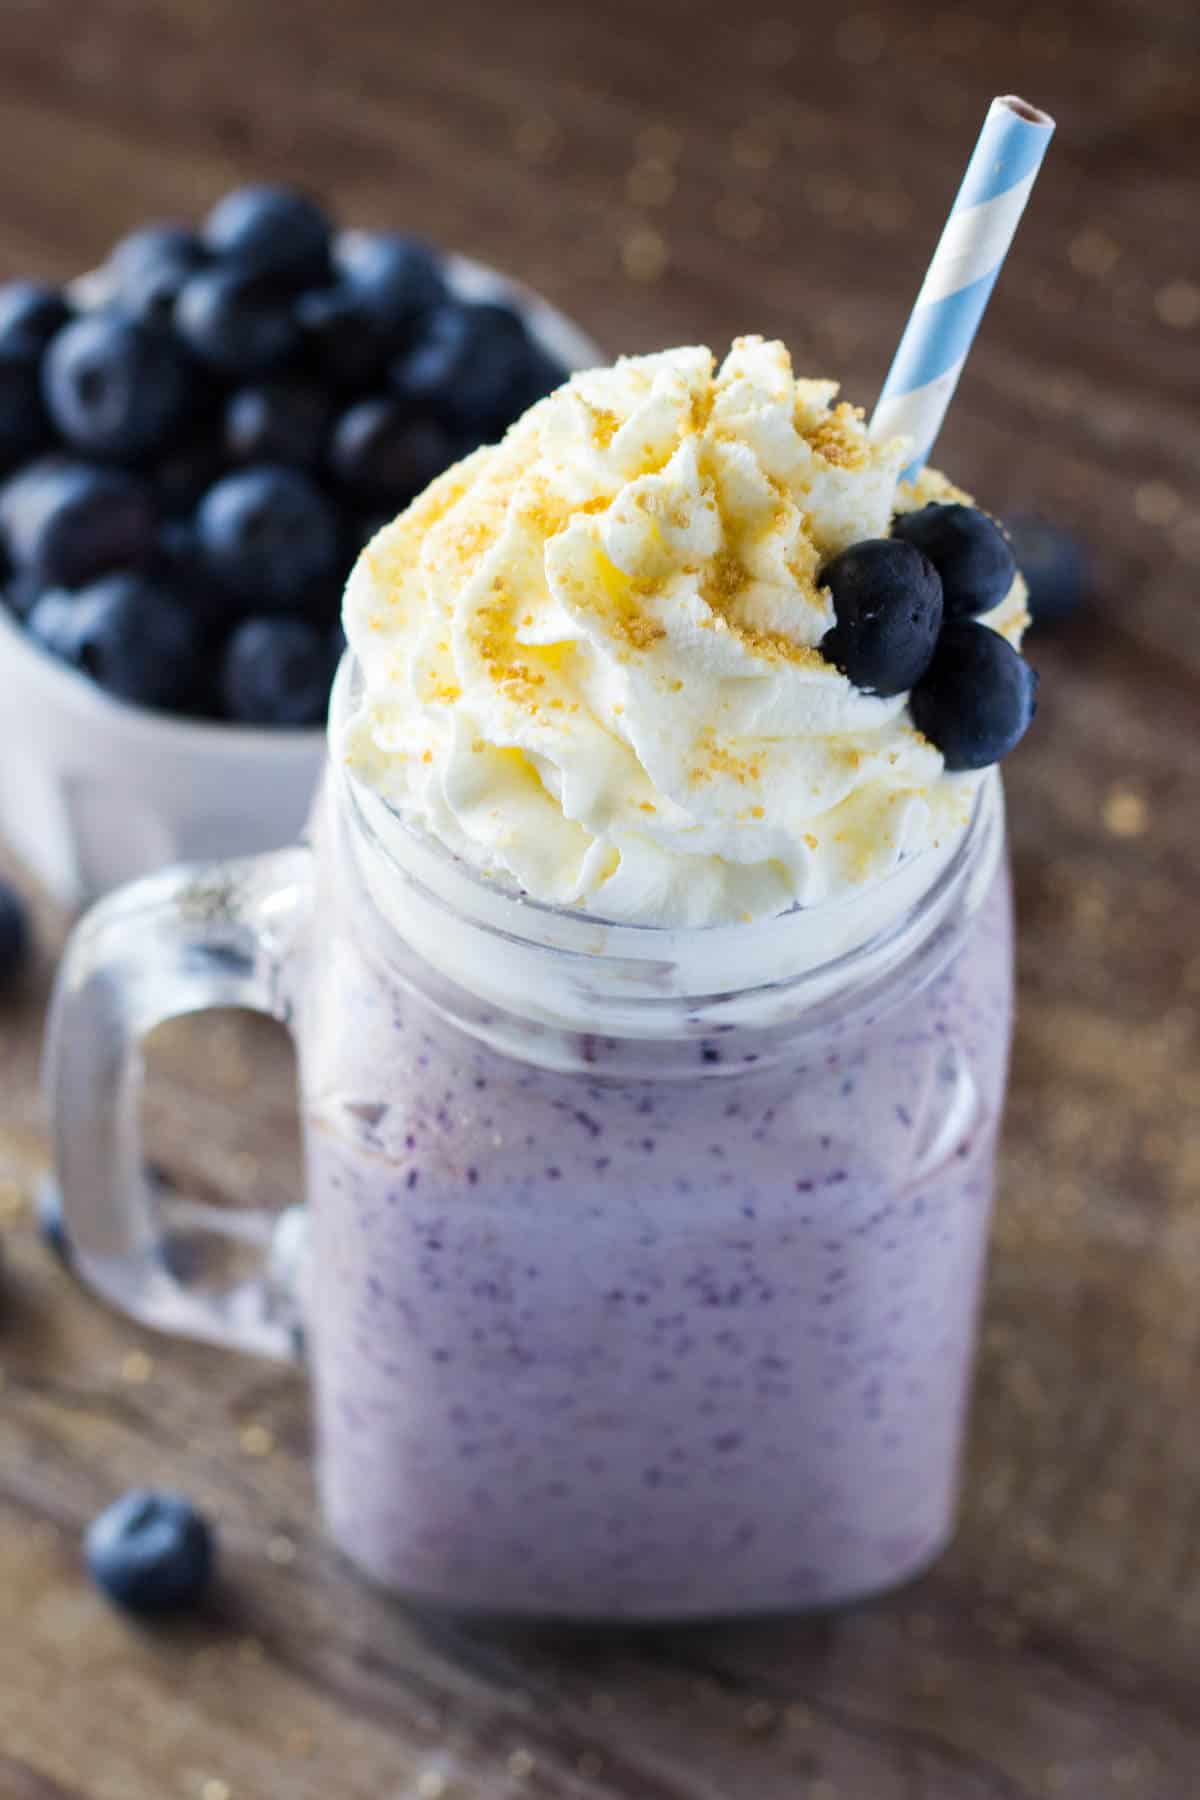 This Blueberry Cheesecake Milkshake has all the flavor of a vanilla milkshake & blueberry cheesecake! Thick, creamy & so decadent - You NEED to make this!